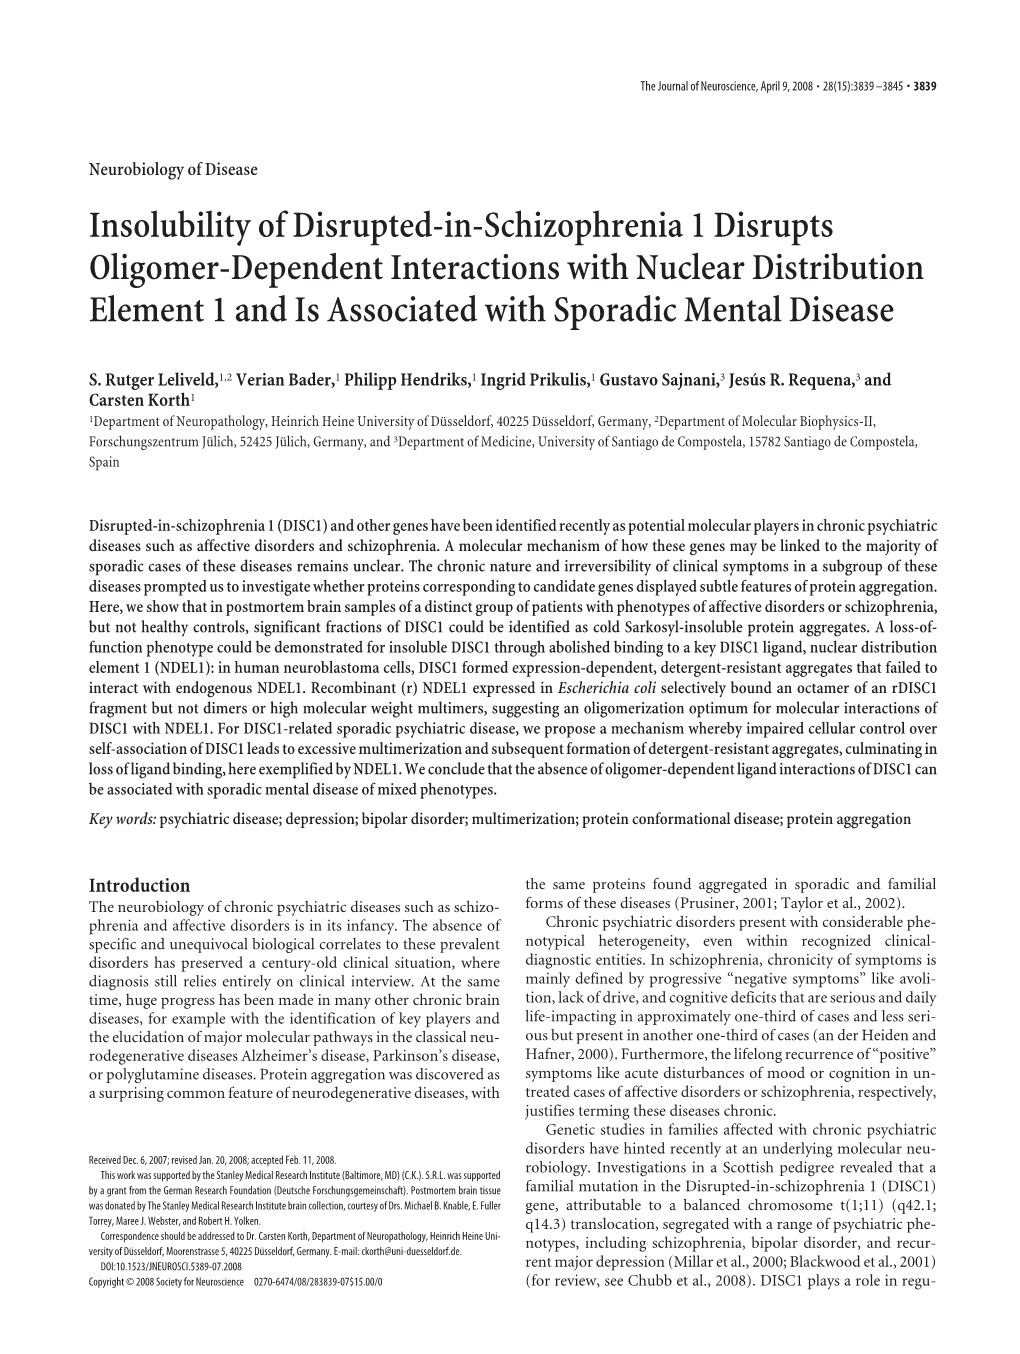 Insolubility of Disrupted-In-Schizophrenia 1